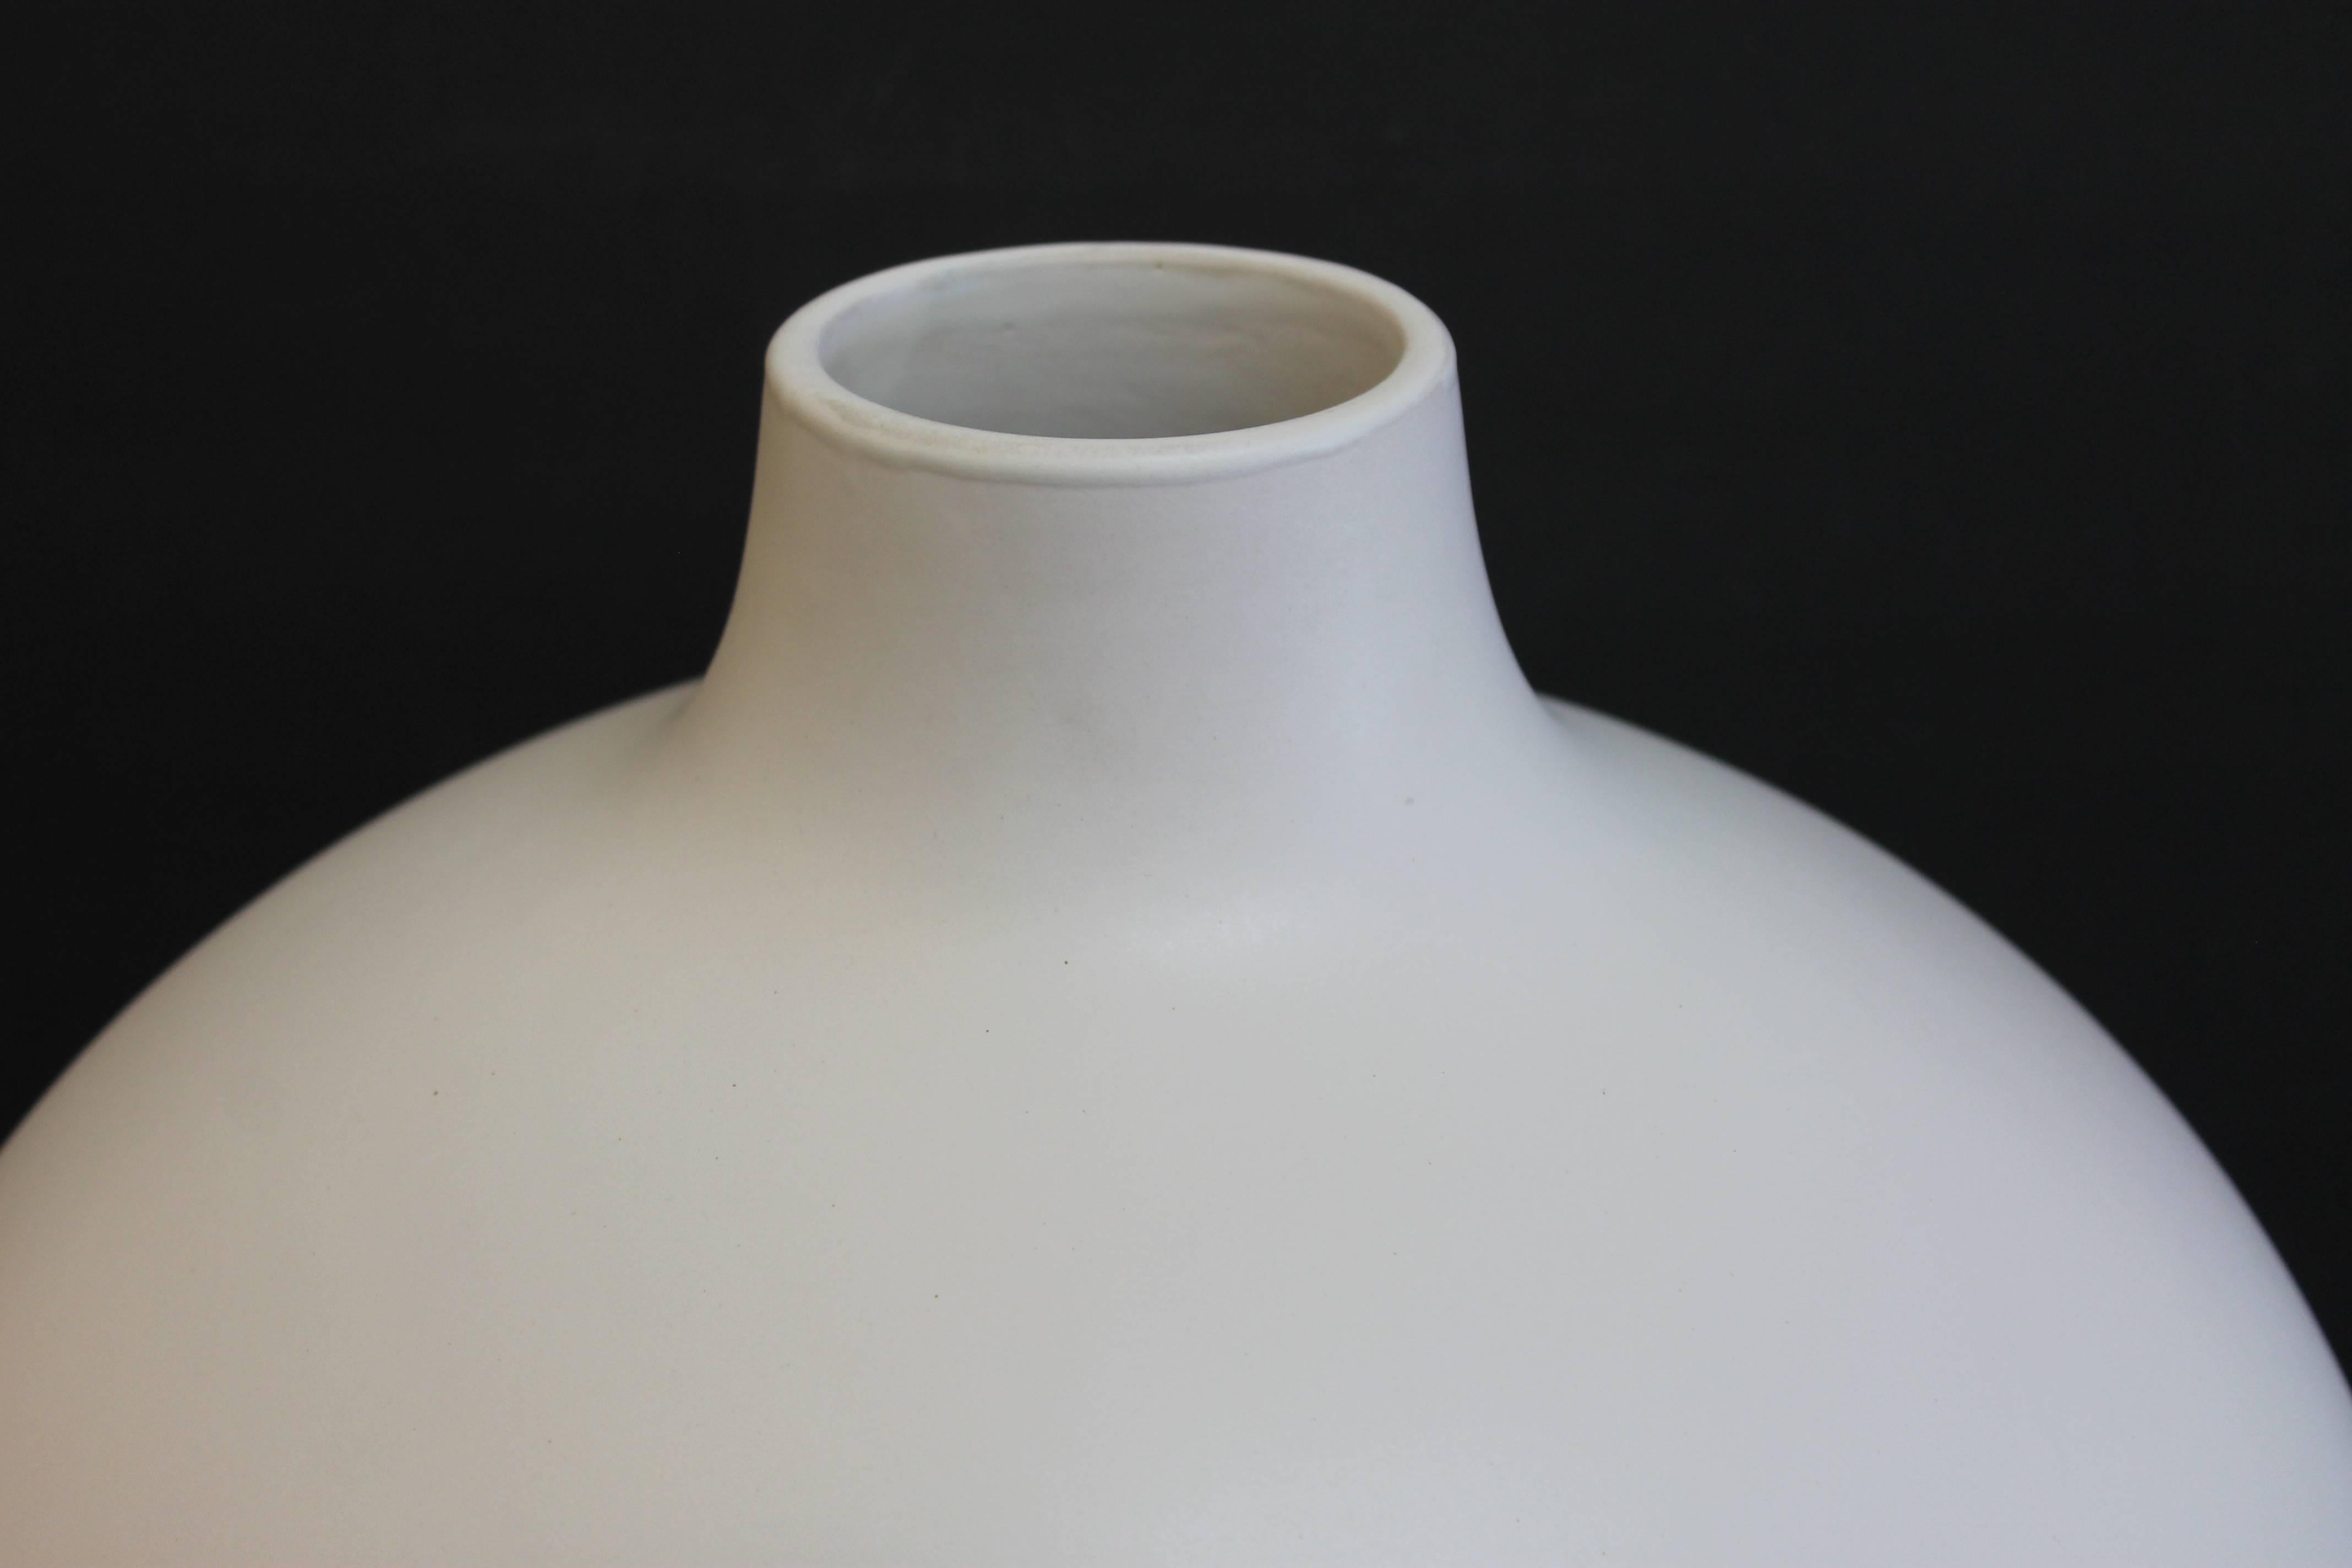 A huge ceramic vase by Mario Bellini, circa 1970s. Tan clay body is glazed in matte white. Hand signed M. Bellini, Milano. Vase is 16